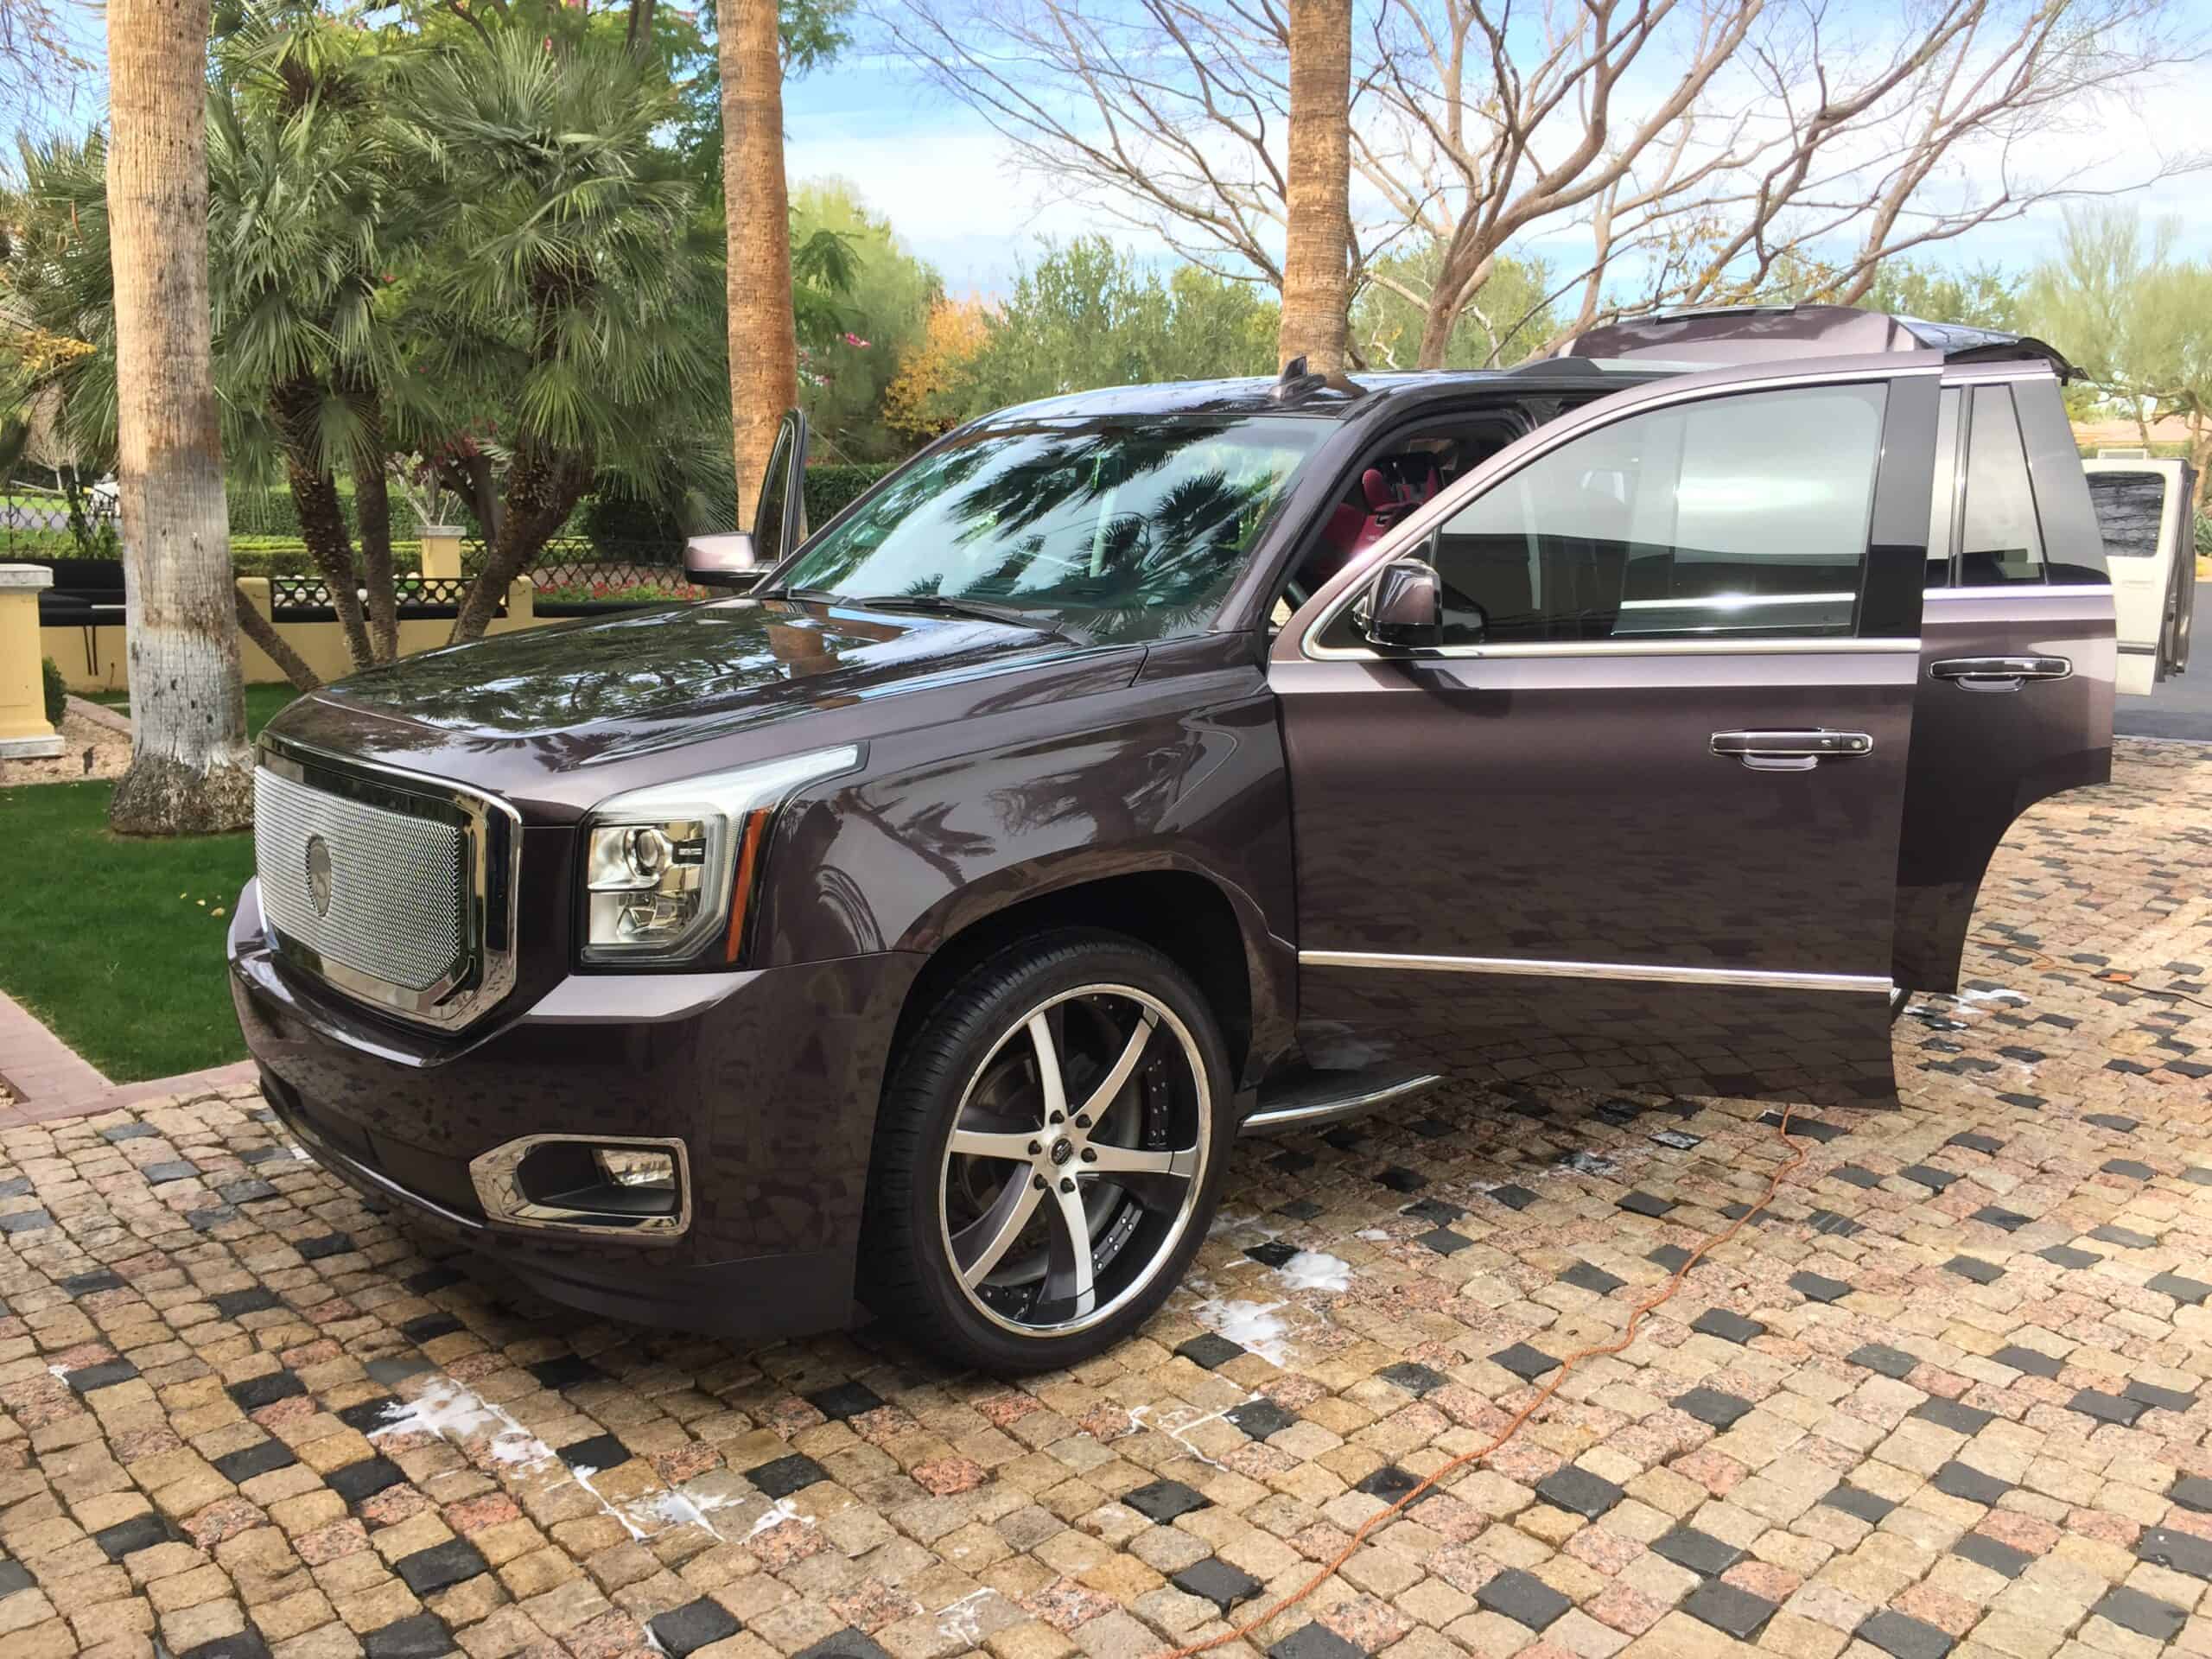 #1 Recommended Detailing Company in Arizona